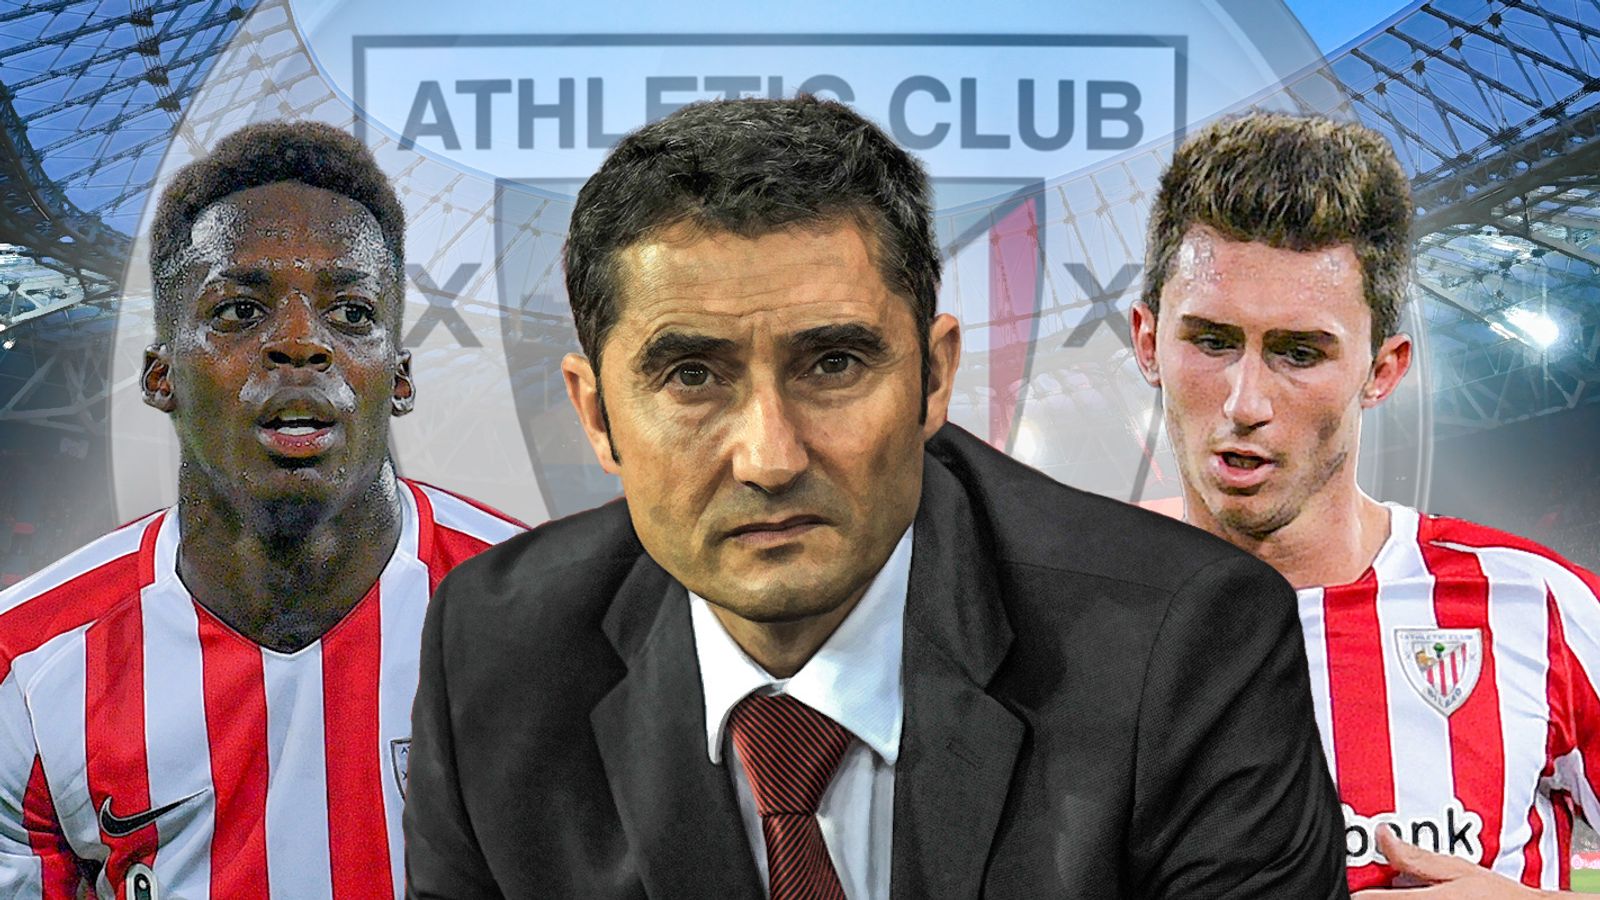 Athletic Bilbao's methods provide lessons for Premier League clubs, Football News